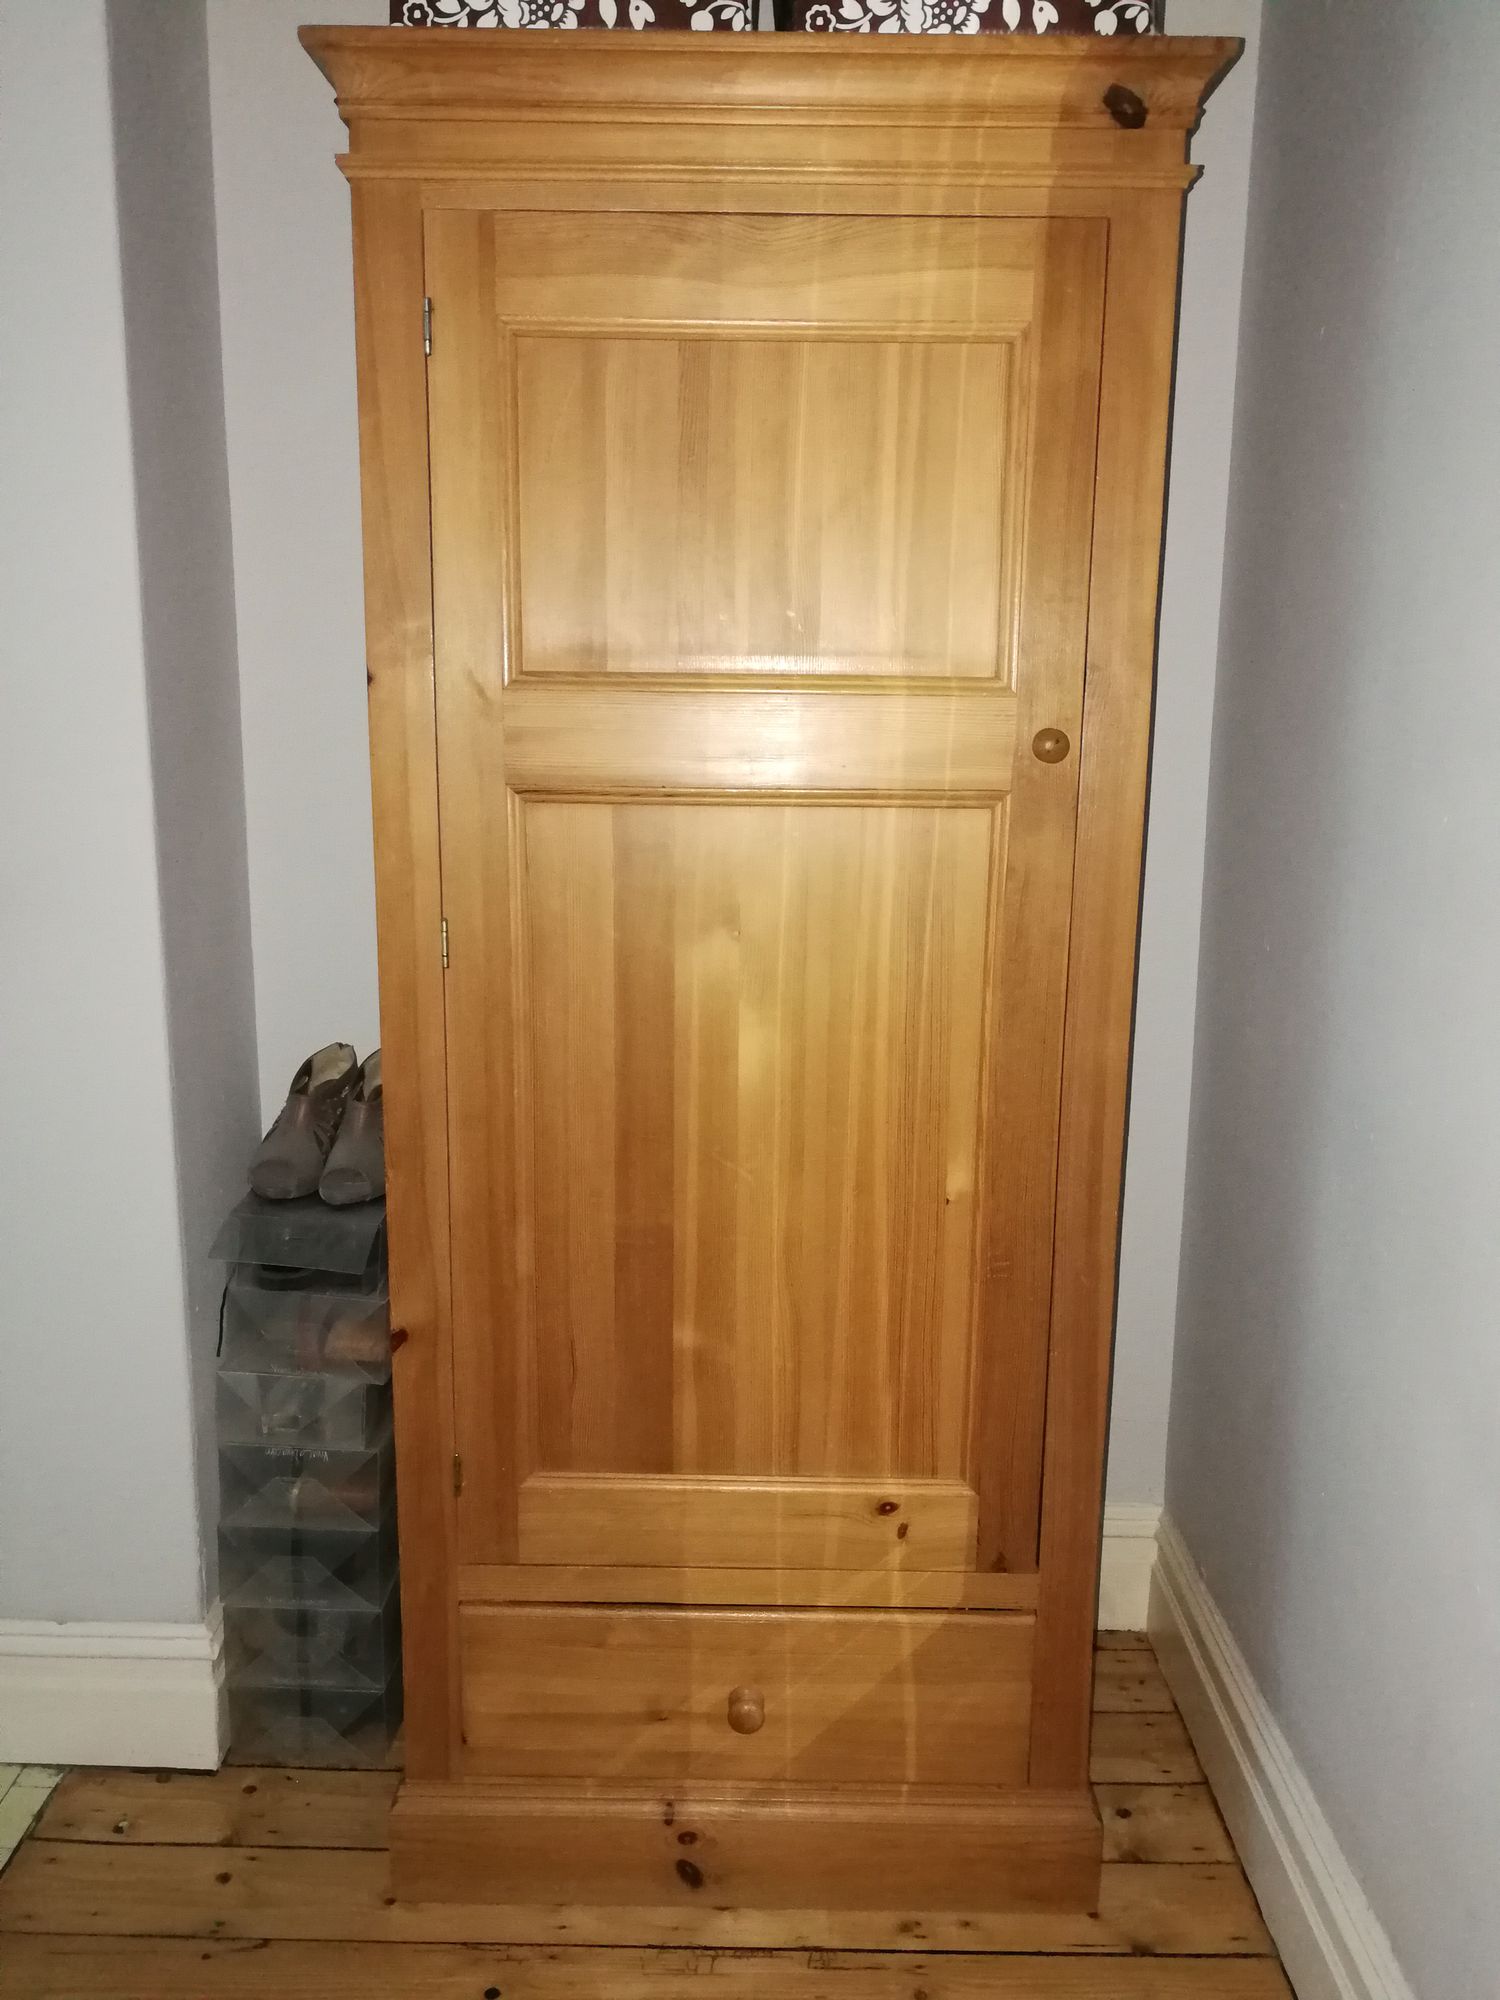 Before, the wardrobe was pine, with brown storage boxes on top.